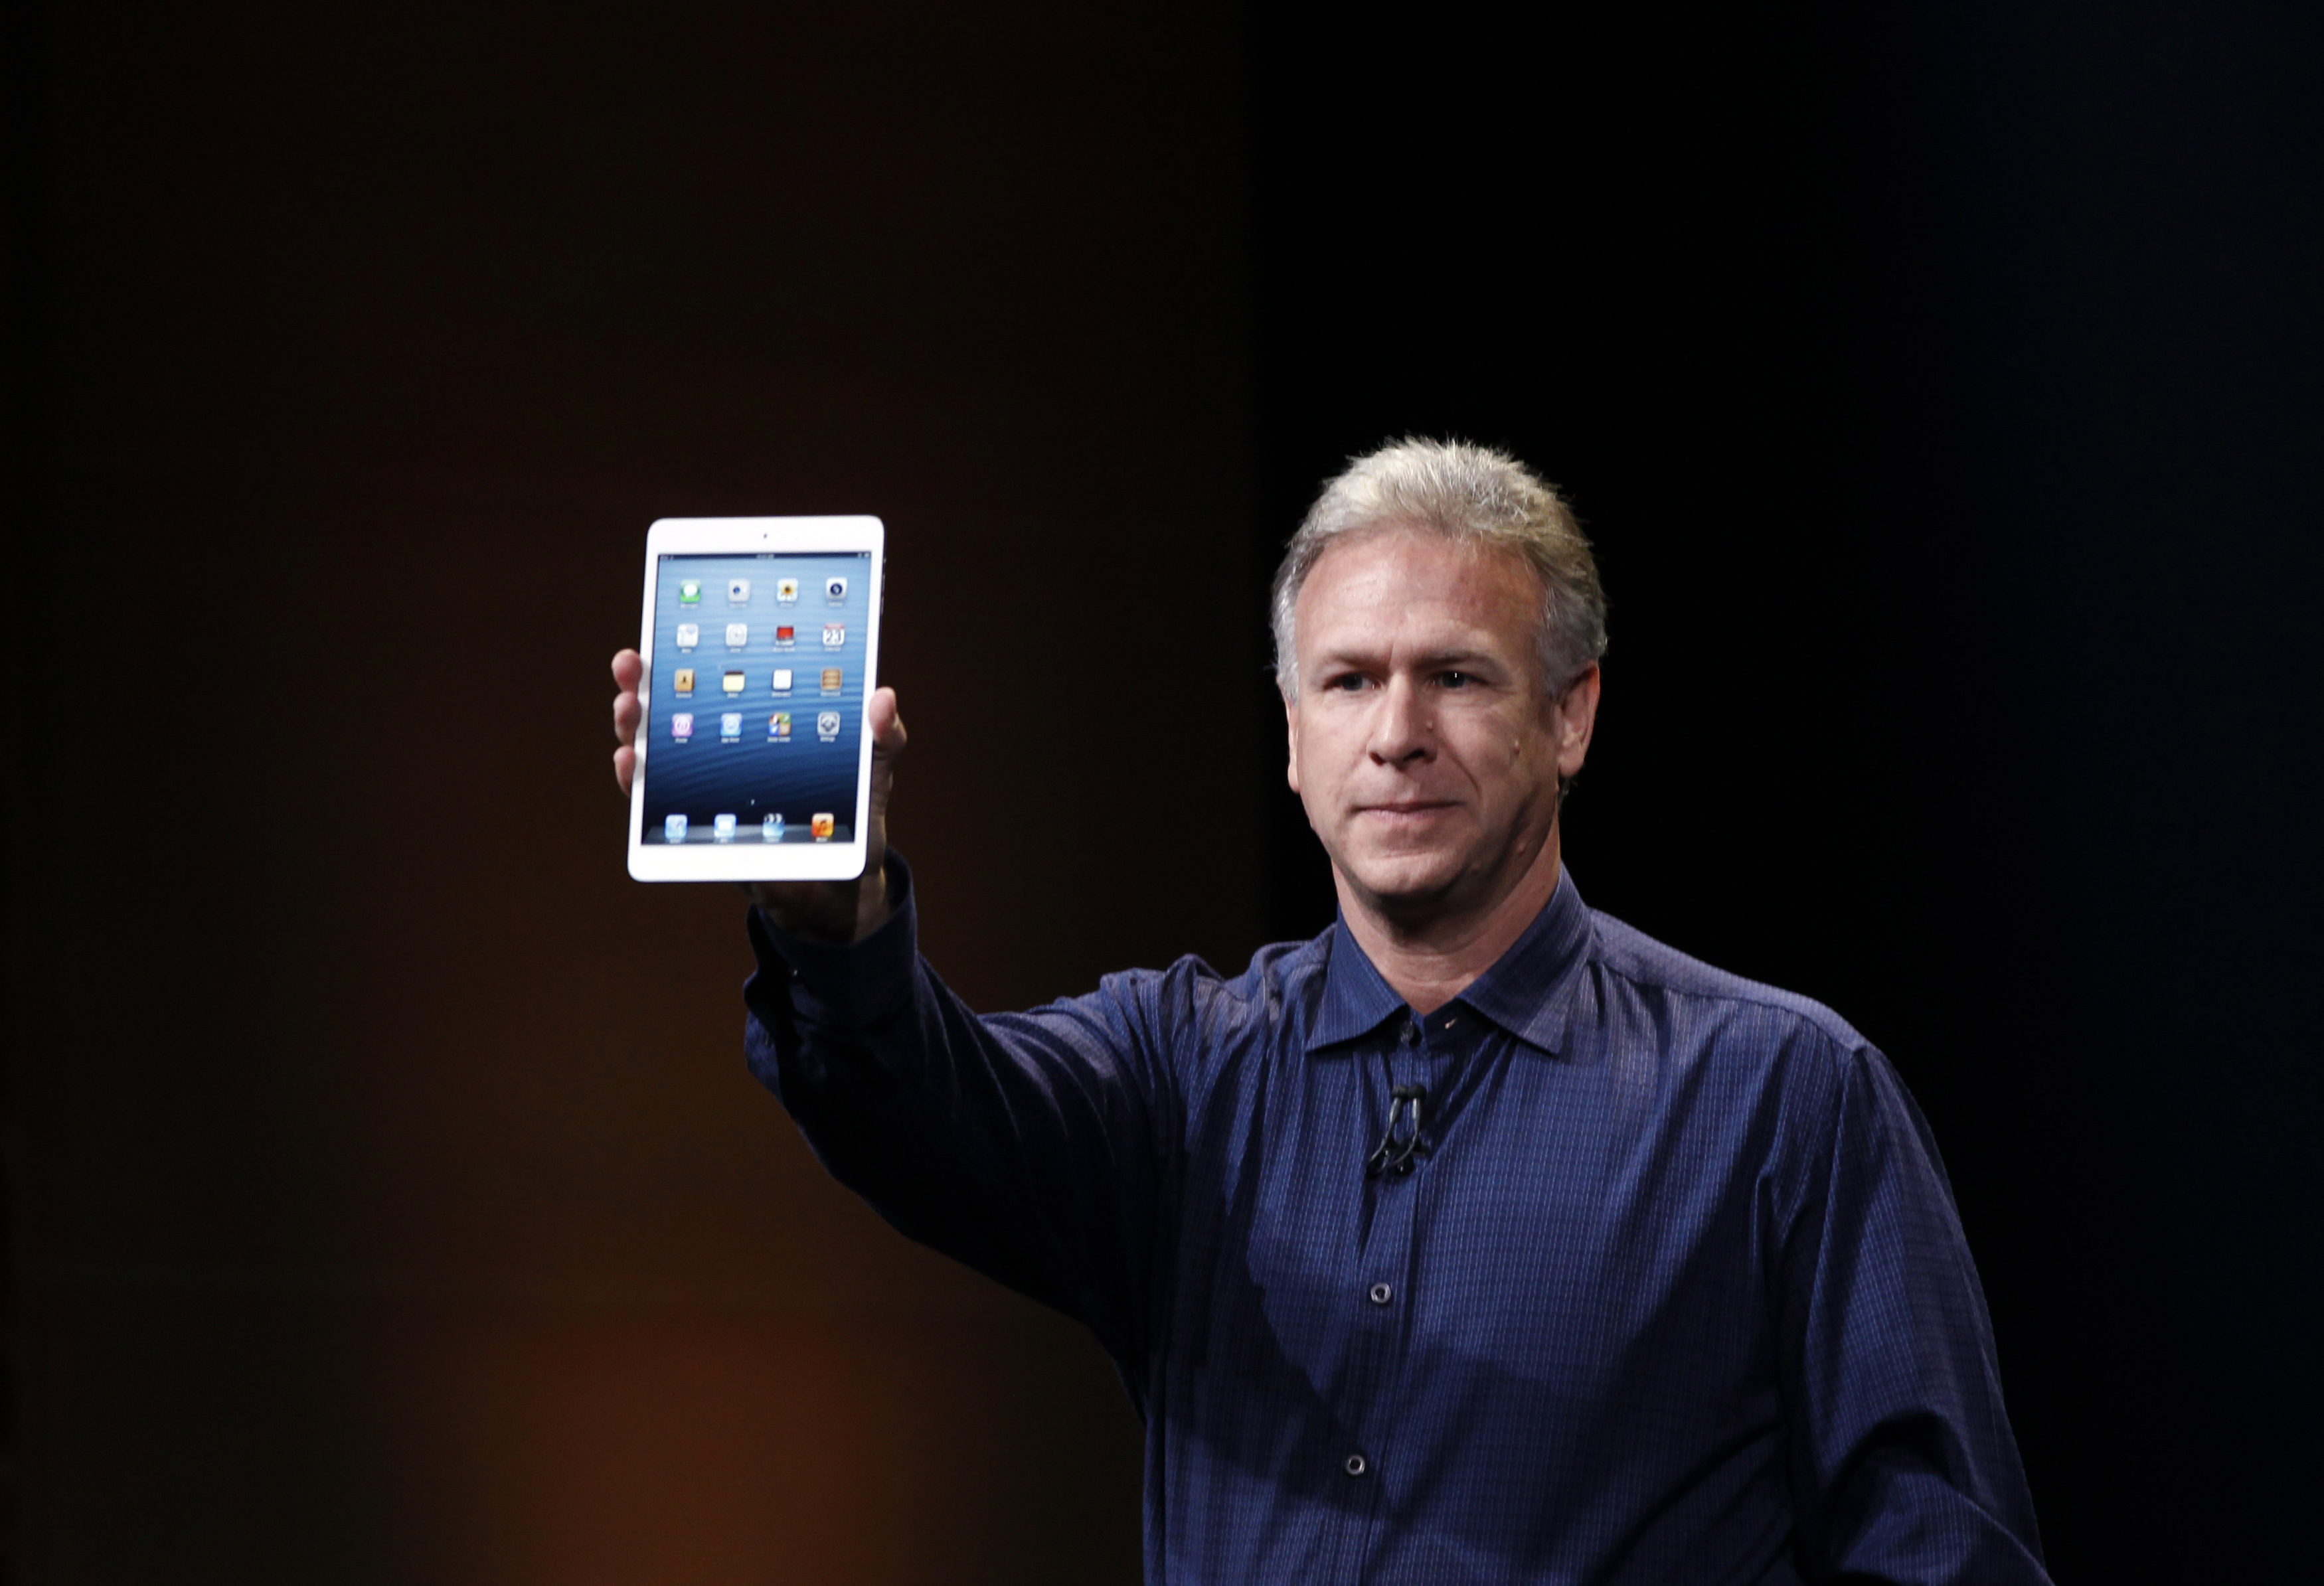 Apple senior vice president of worldwide marketing Philip Schiller introduces the new iPad mini during an Apple event in San Jose